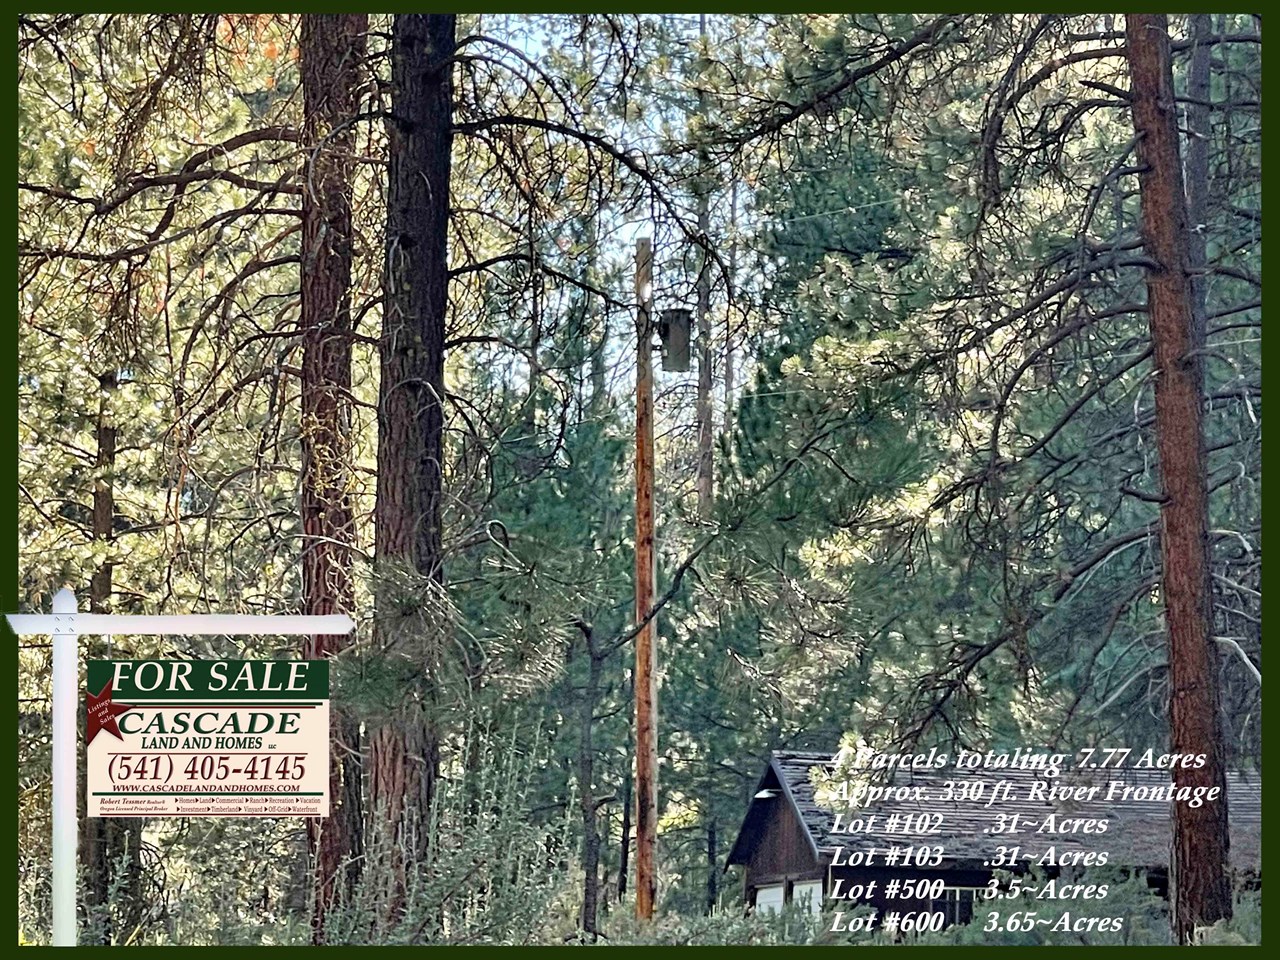 power and phone are on the property! this property is just waiting for your new ideas! it has a good start with the power and phone in, a 2 car garage and small rustic cabin. 


mls # 220156878 
lot #102, #103
2610/2620 south chiloquin road, chiloquin, oregon
